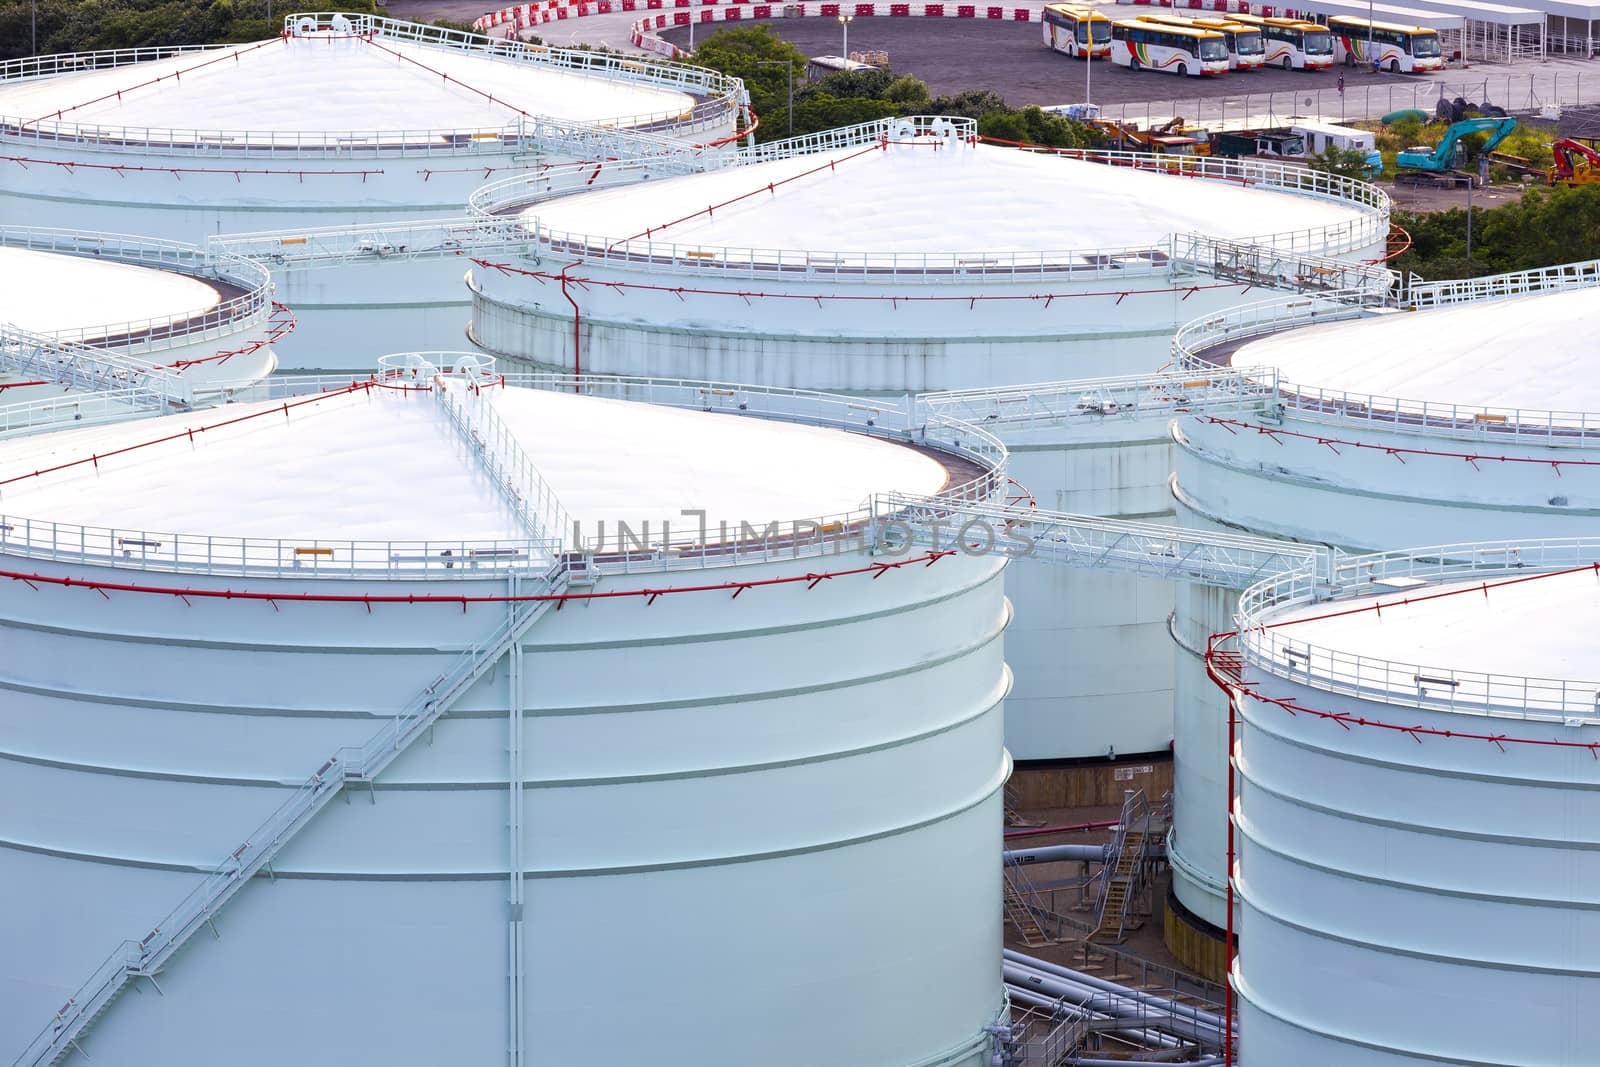 Gas storage tank in industrial plant by kawing921